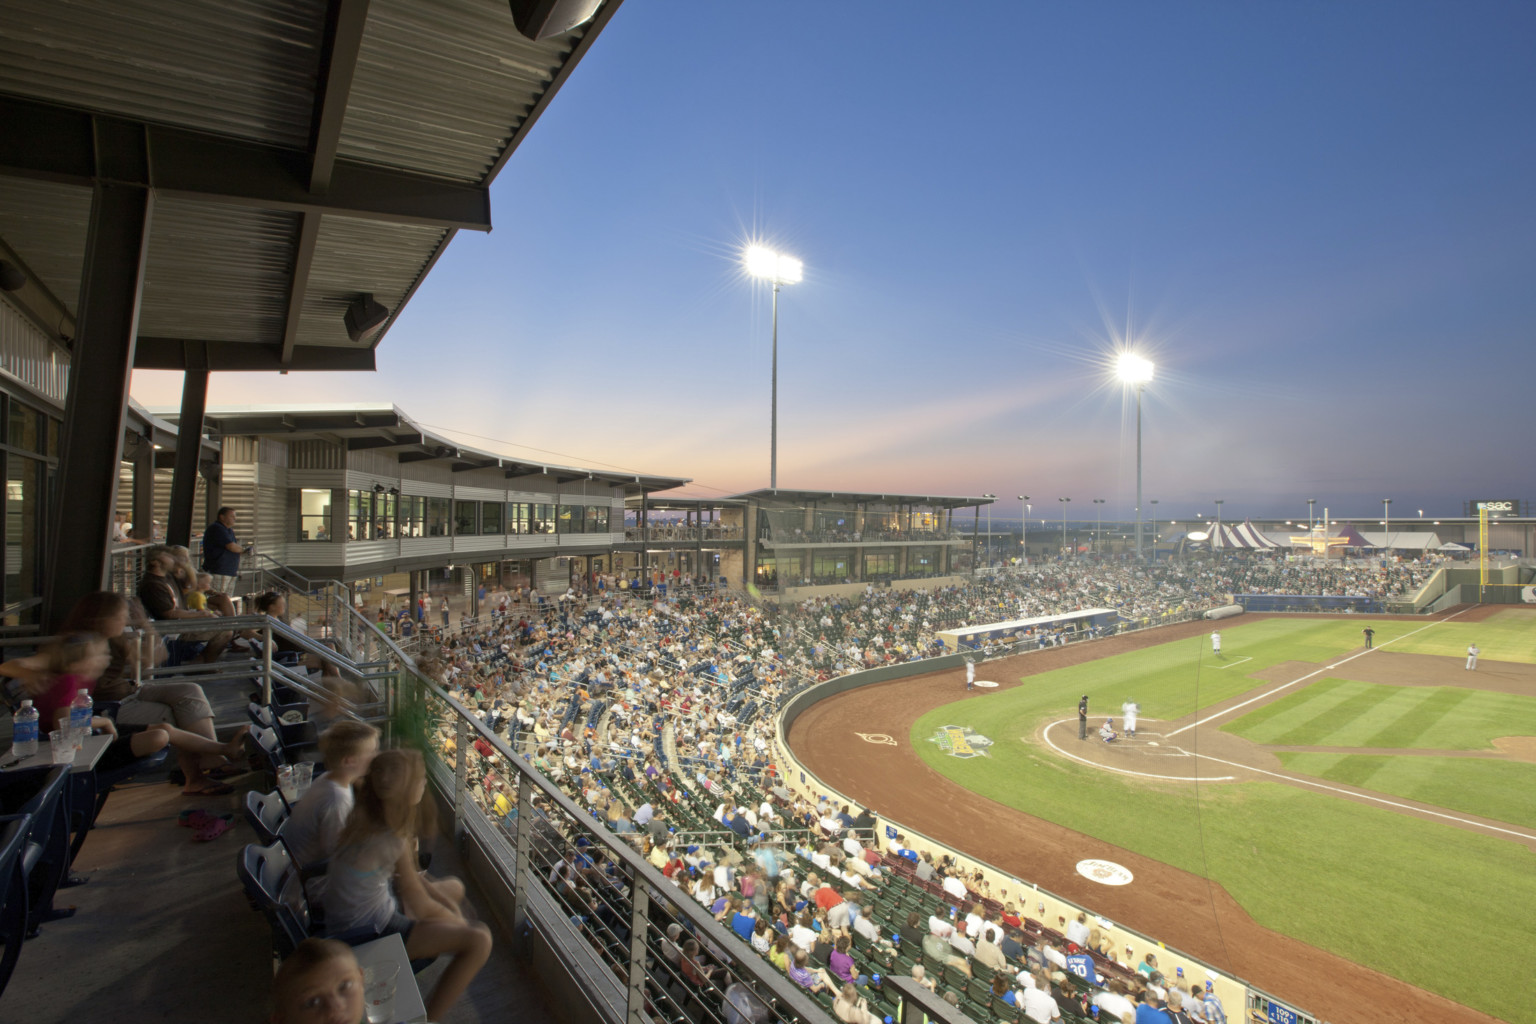 Werner Park, home of the Omaha Storm Chasers, viewed from the upper deck seating along the third baseline with stadium lights